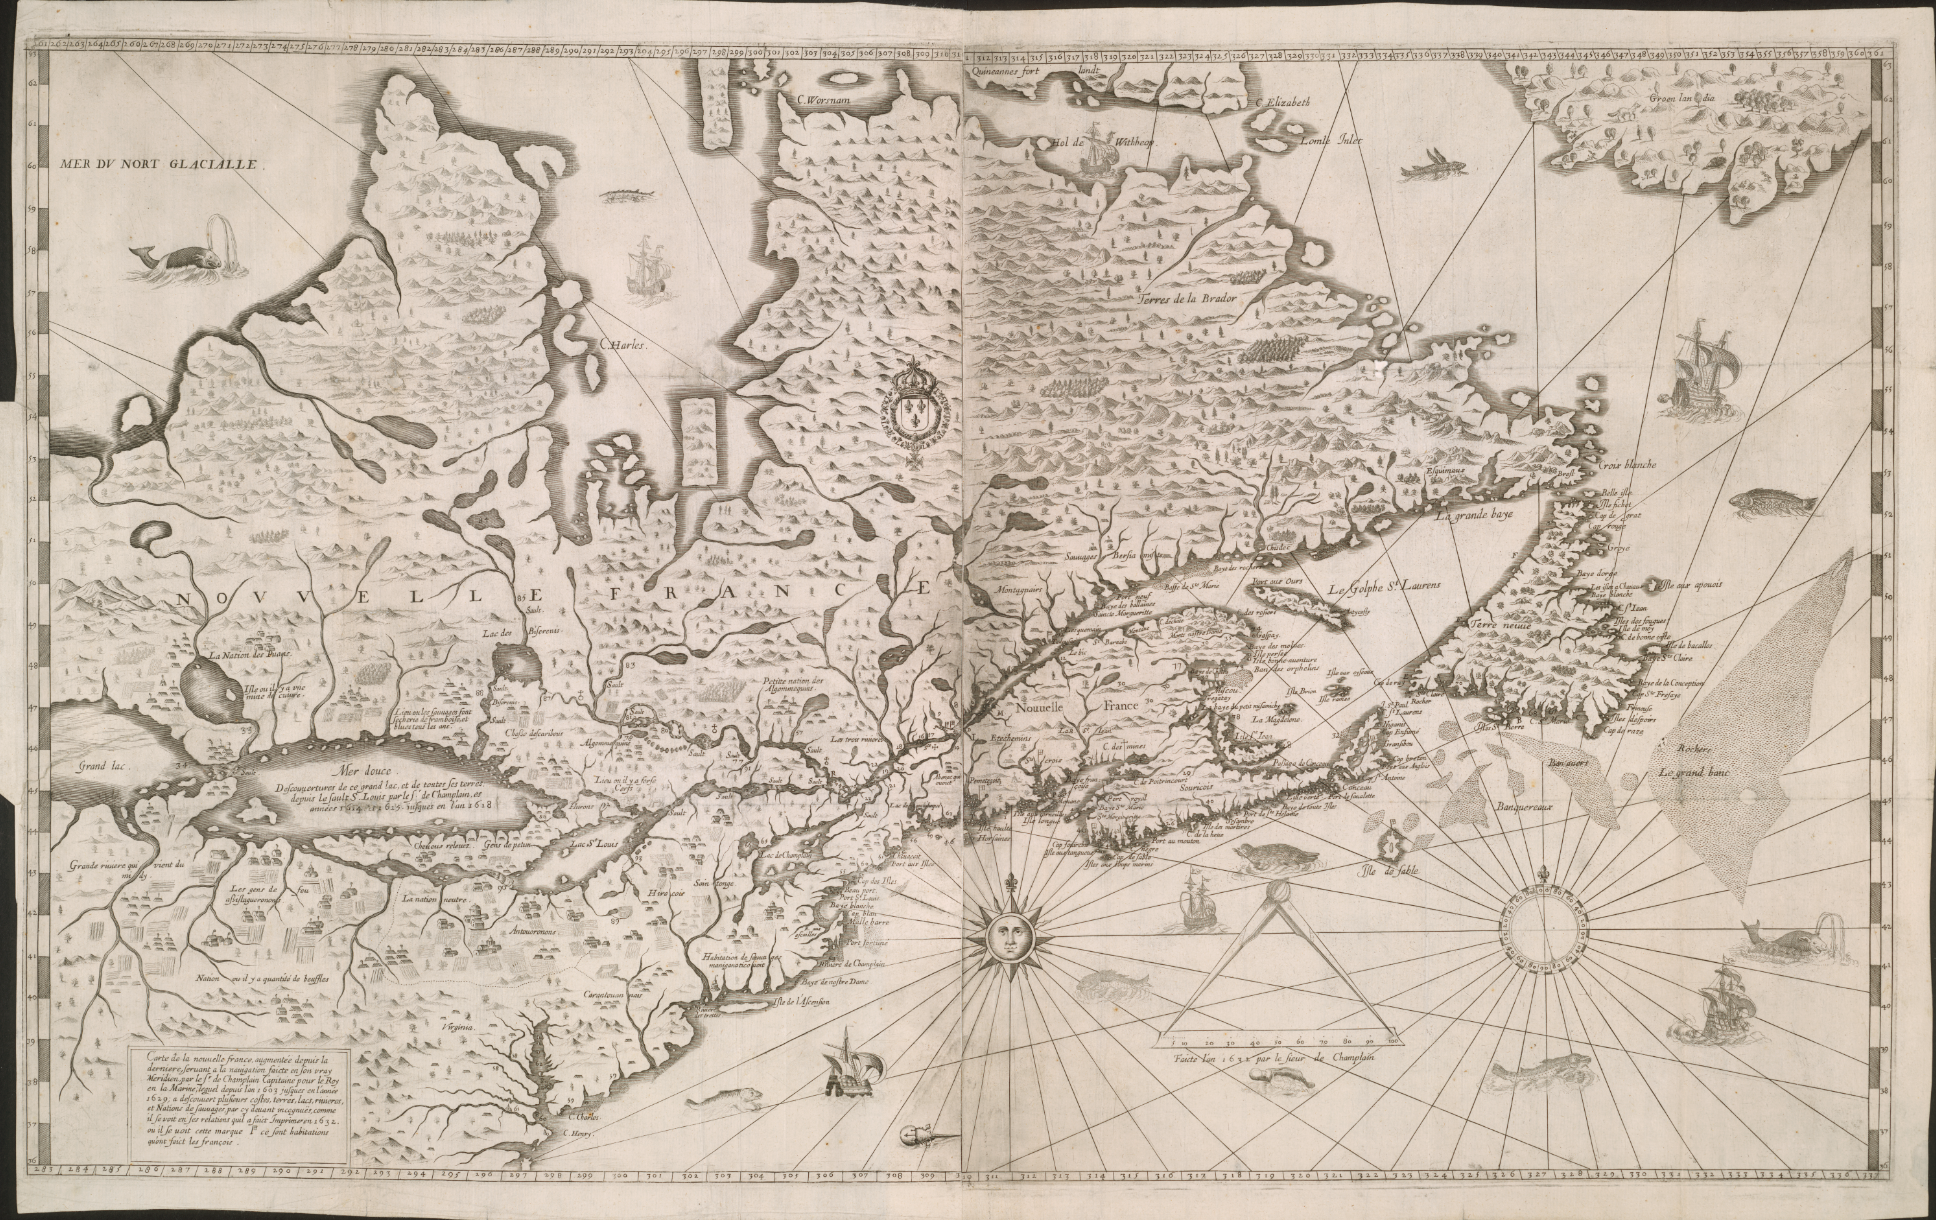 Old map of the St. Lawrence River area